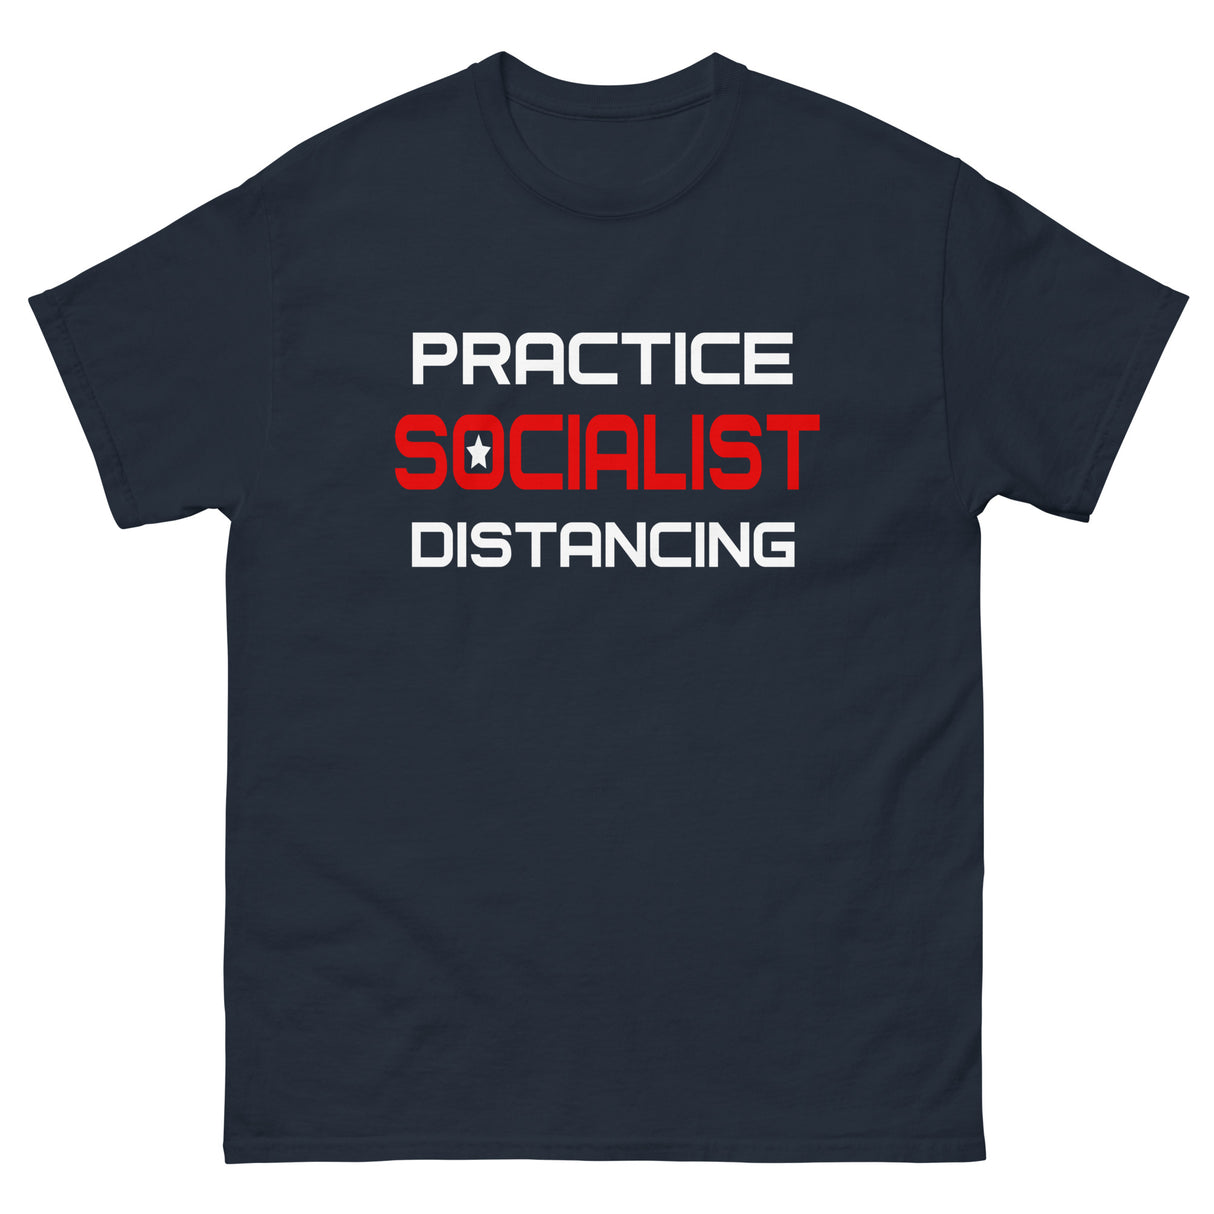 Practice Socialist Distancing Heavy Cotton Shirt - Libertarian Country